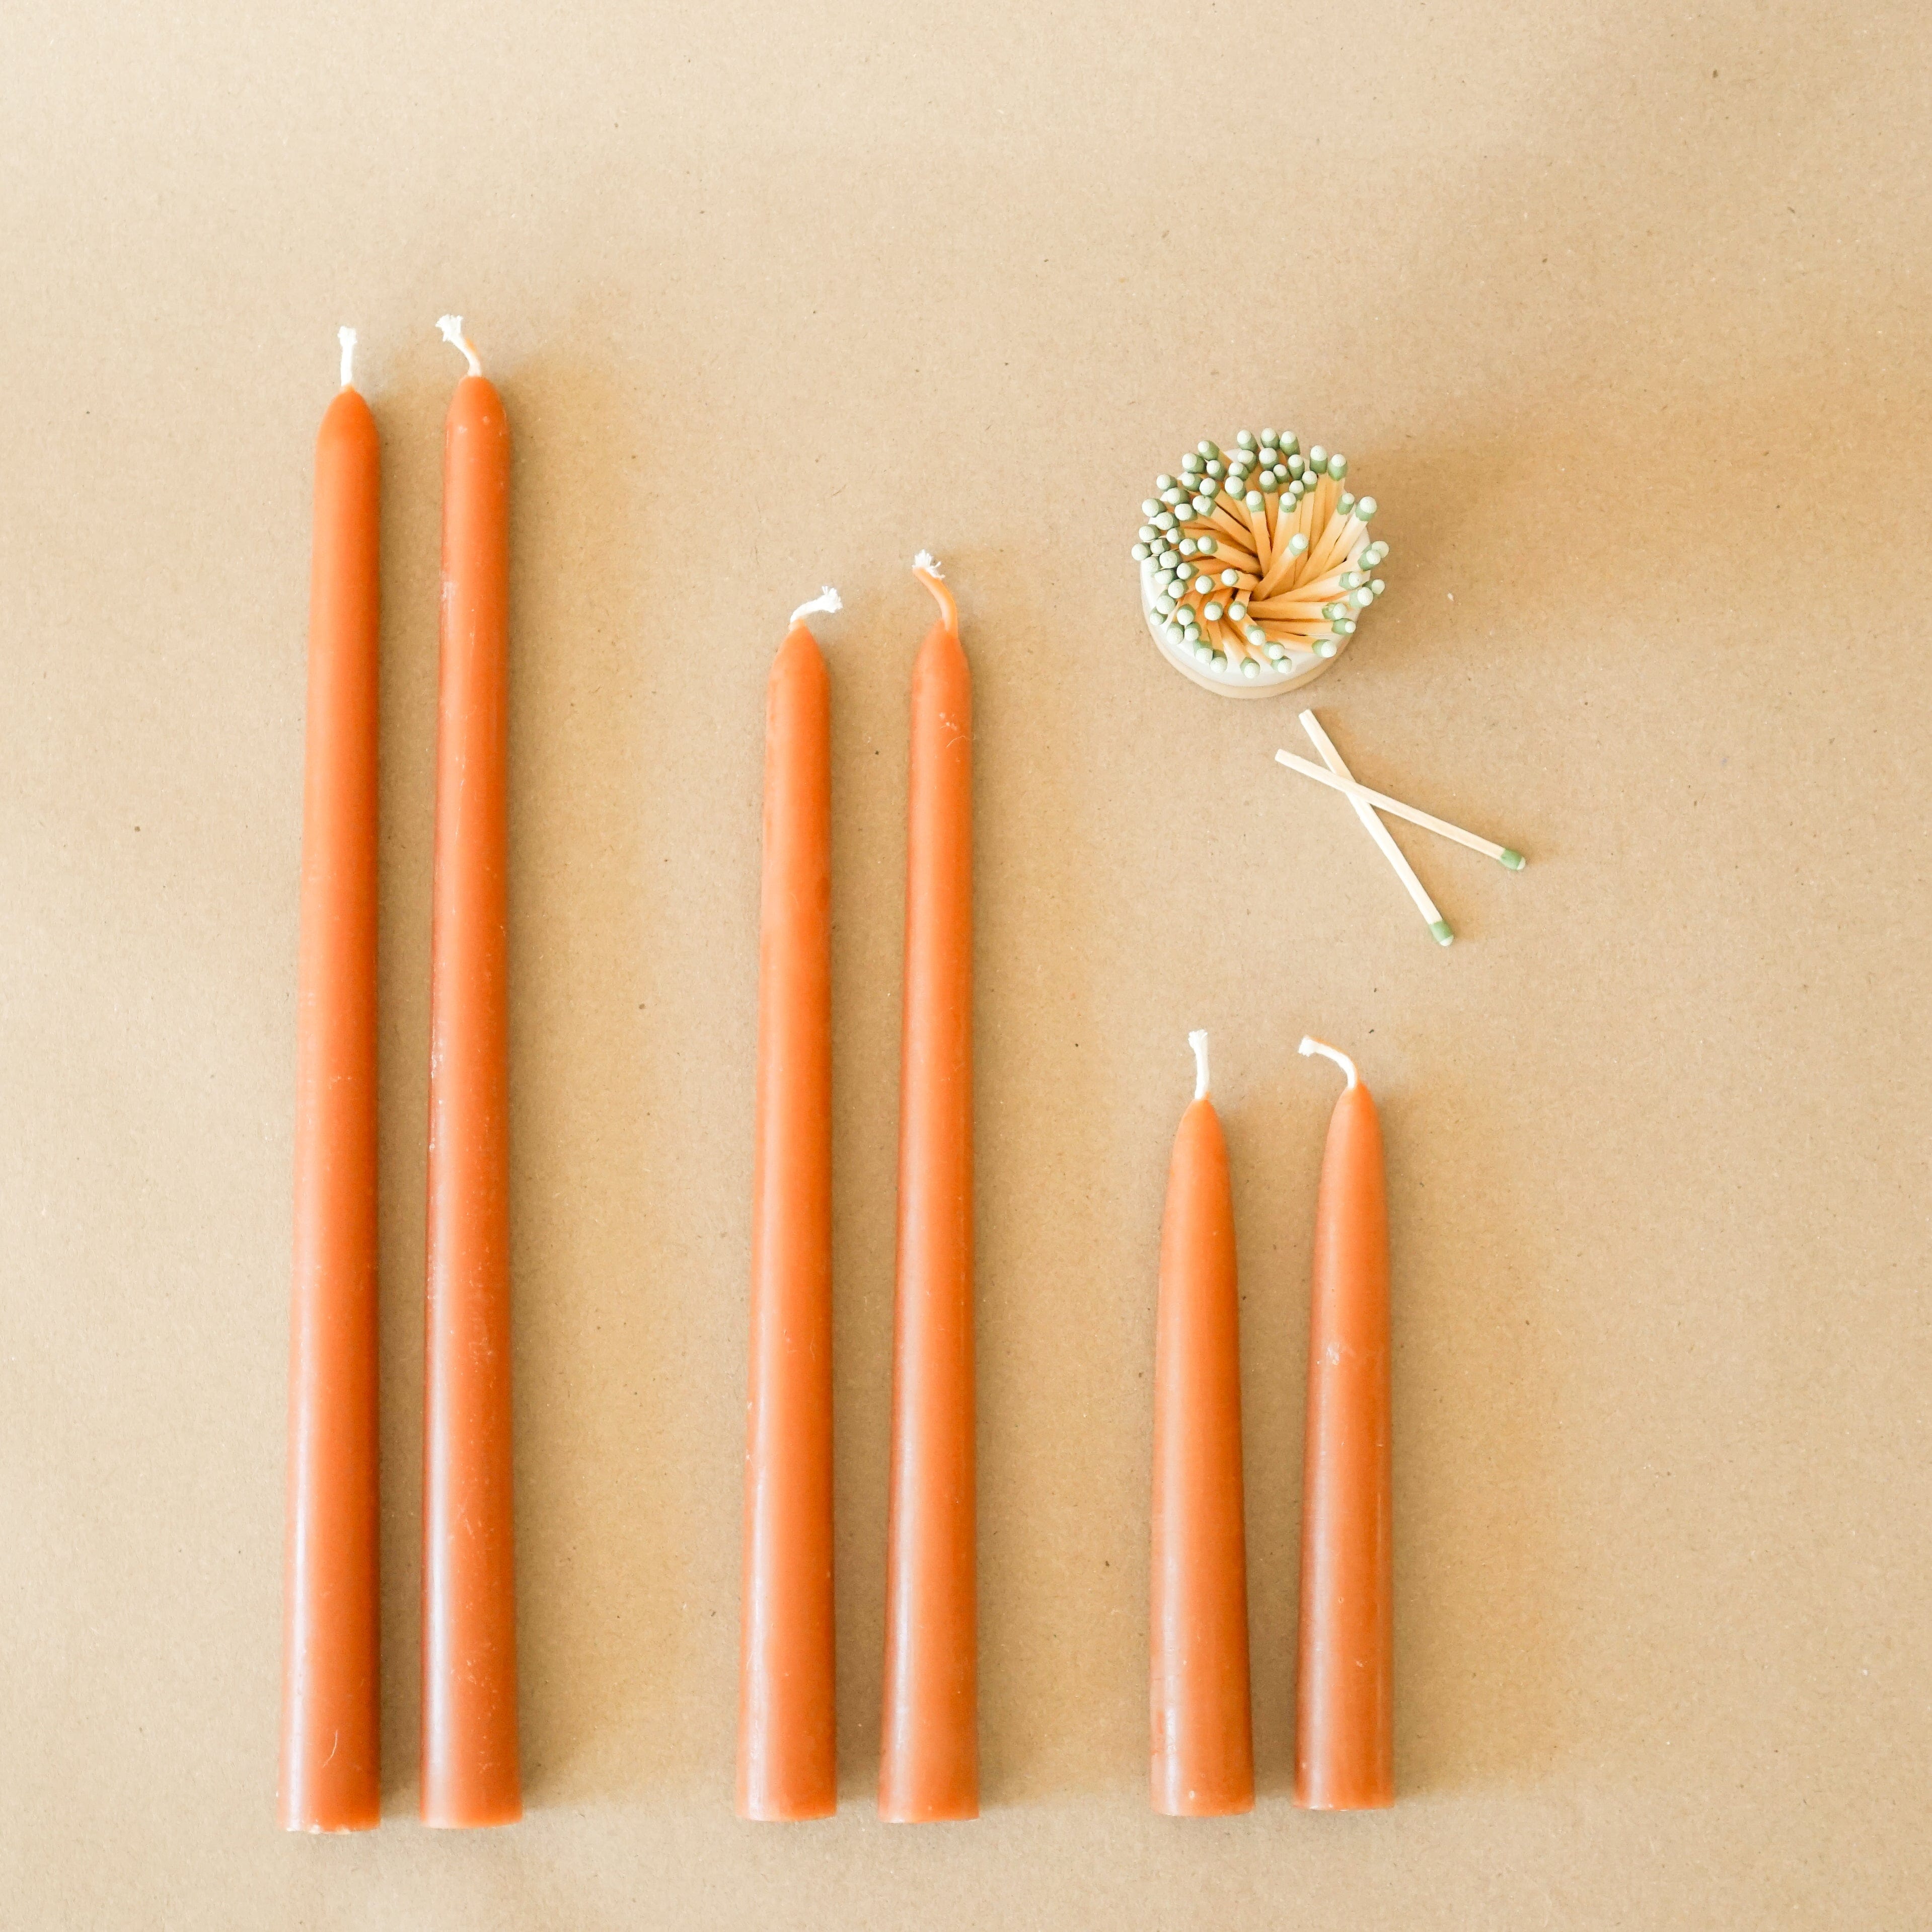 GREENTREE CANDLES Decor Terracotta / 6 Taper Candles by Greentree